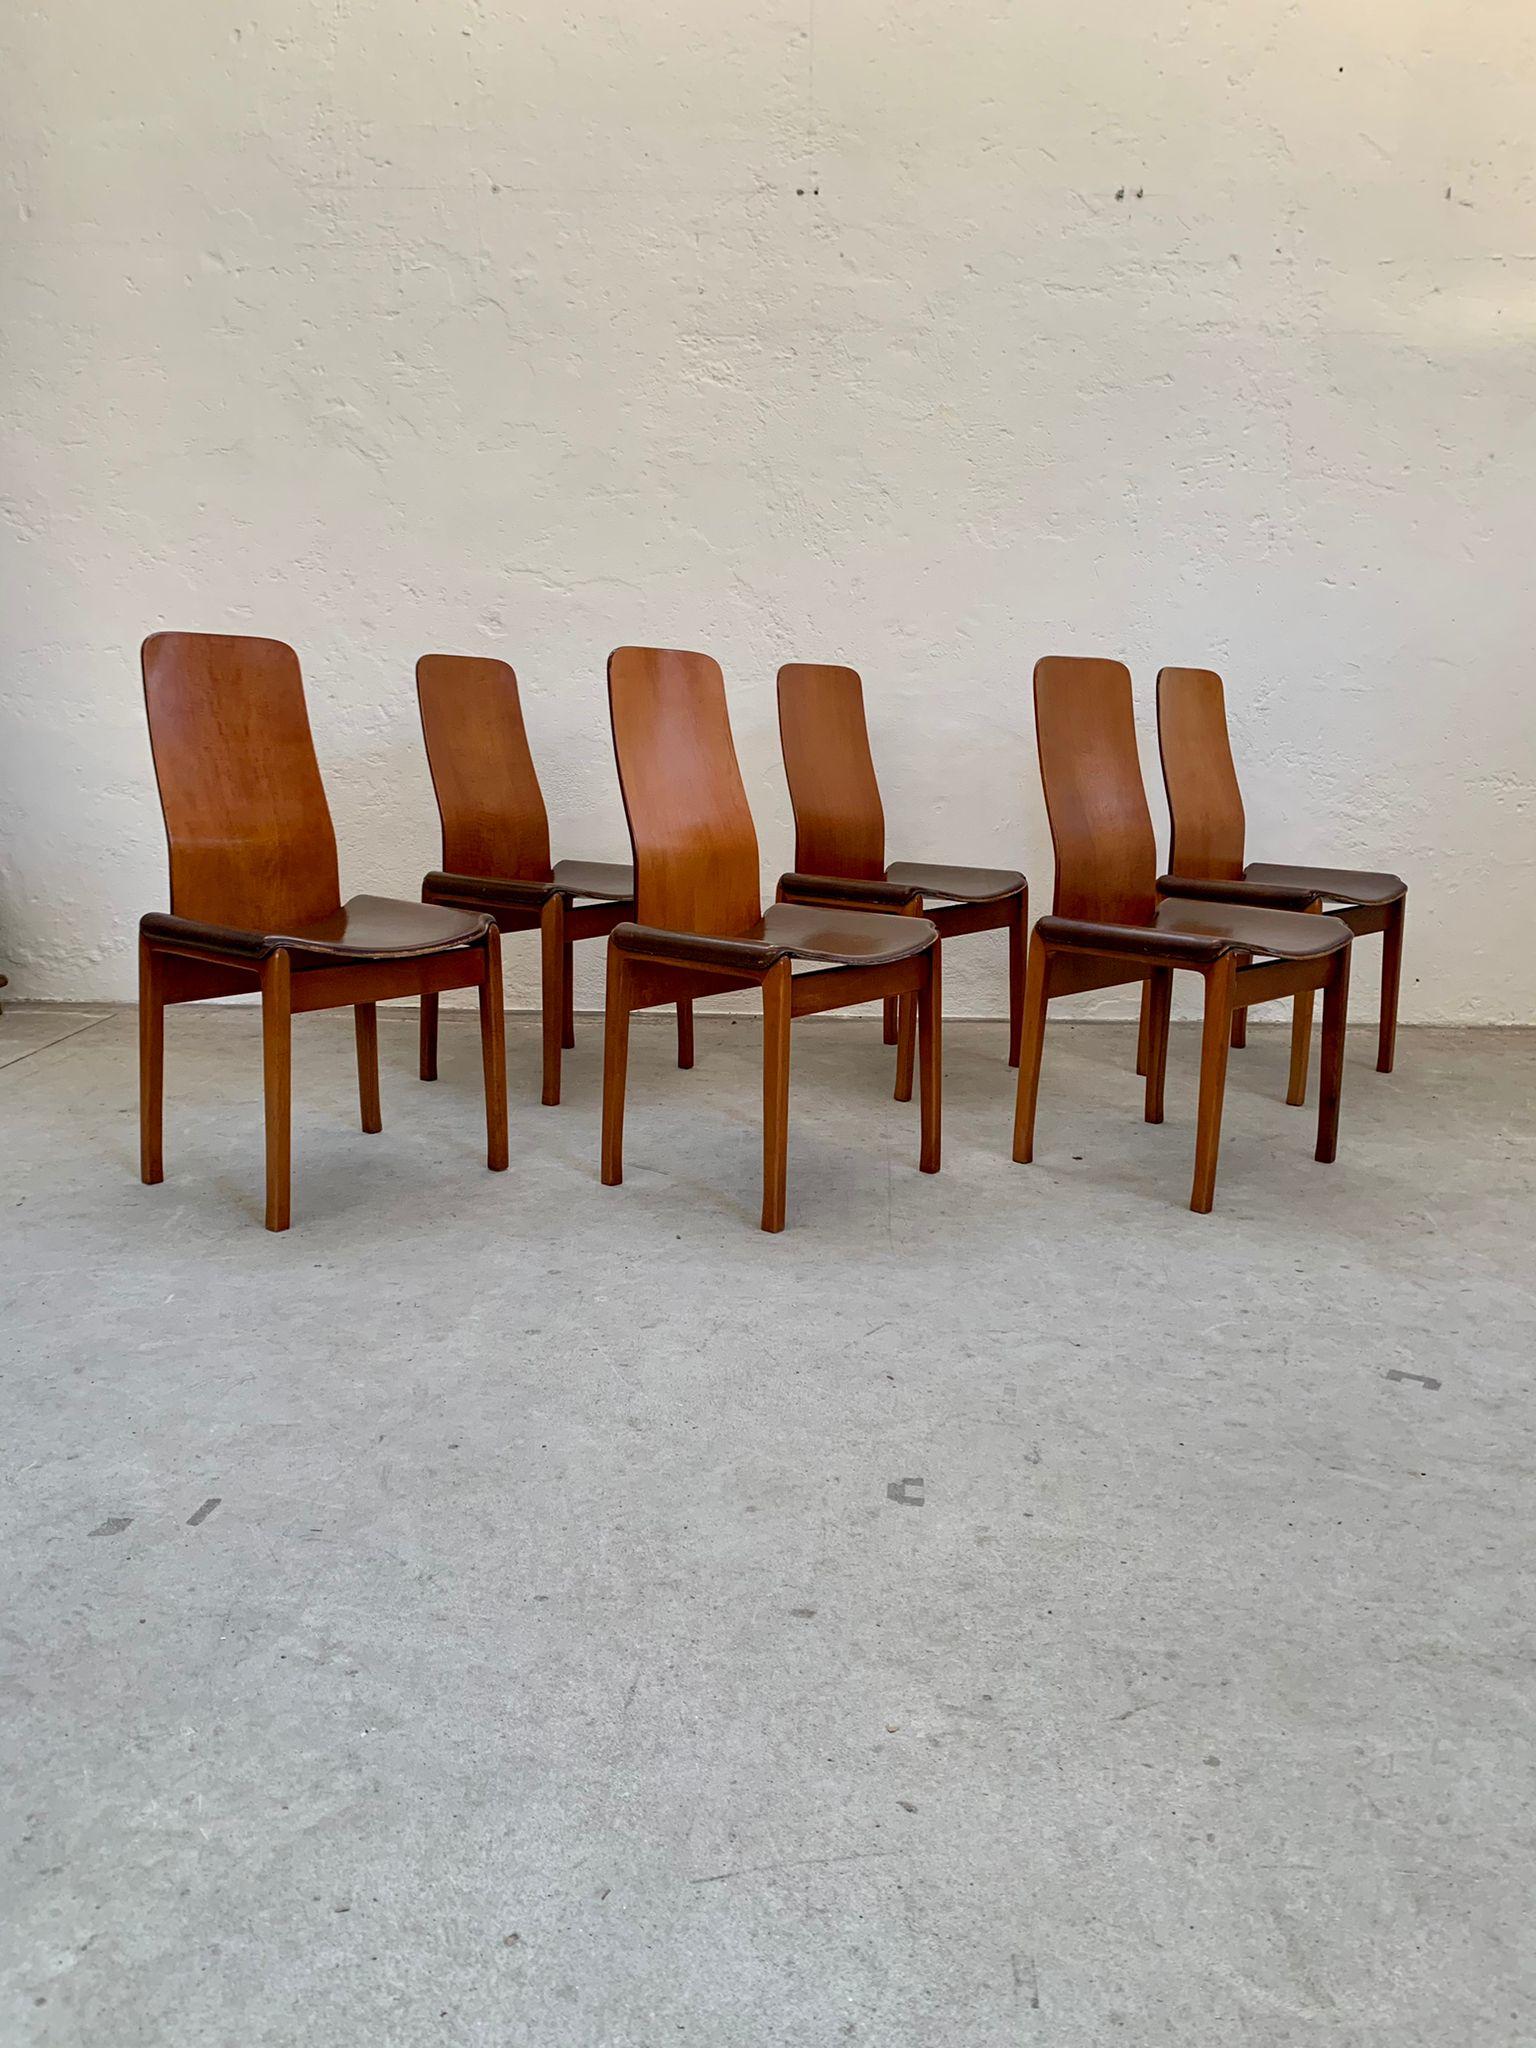 Set of Fiorenza chairs in wood and leather by Tito Agnoli for Molteni, 1968
The chair is made of walnut, the seat is hazelnut-coloured.
The author is Tito Agnoli for Molteni.
The set of six chairs is in good condition, slight signs of wear and tear